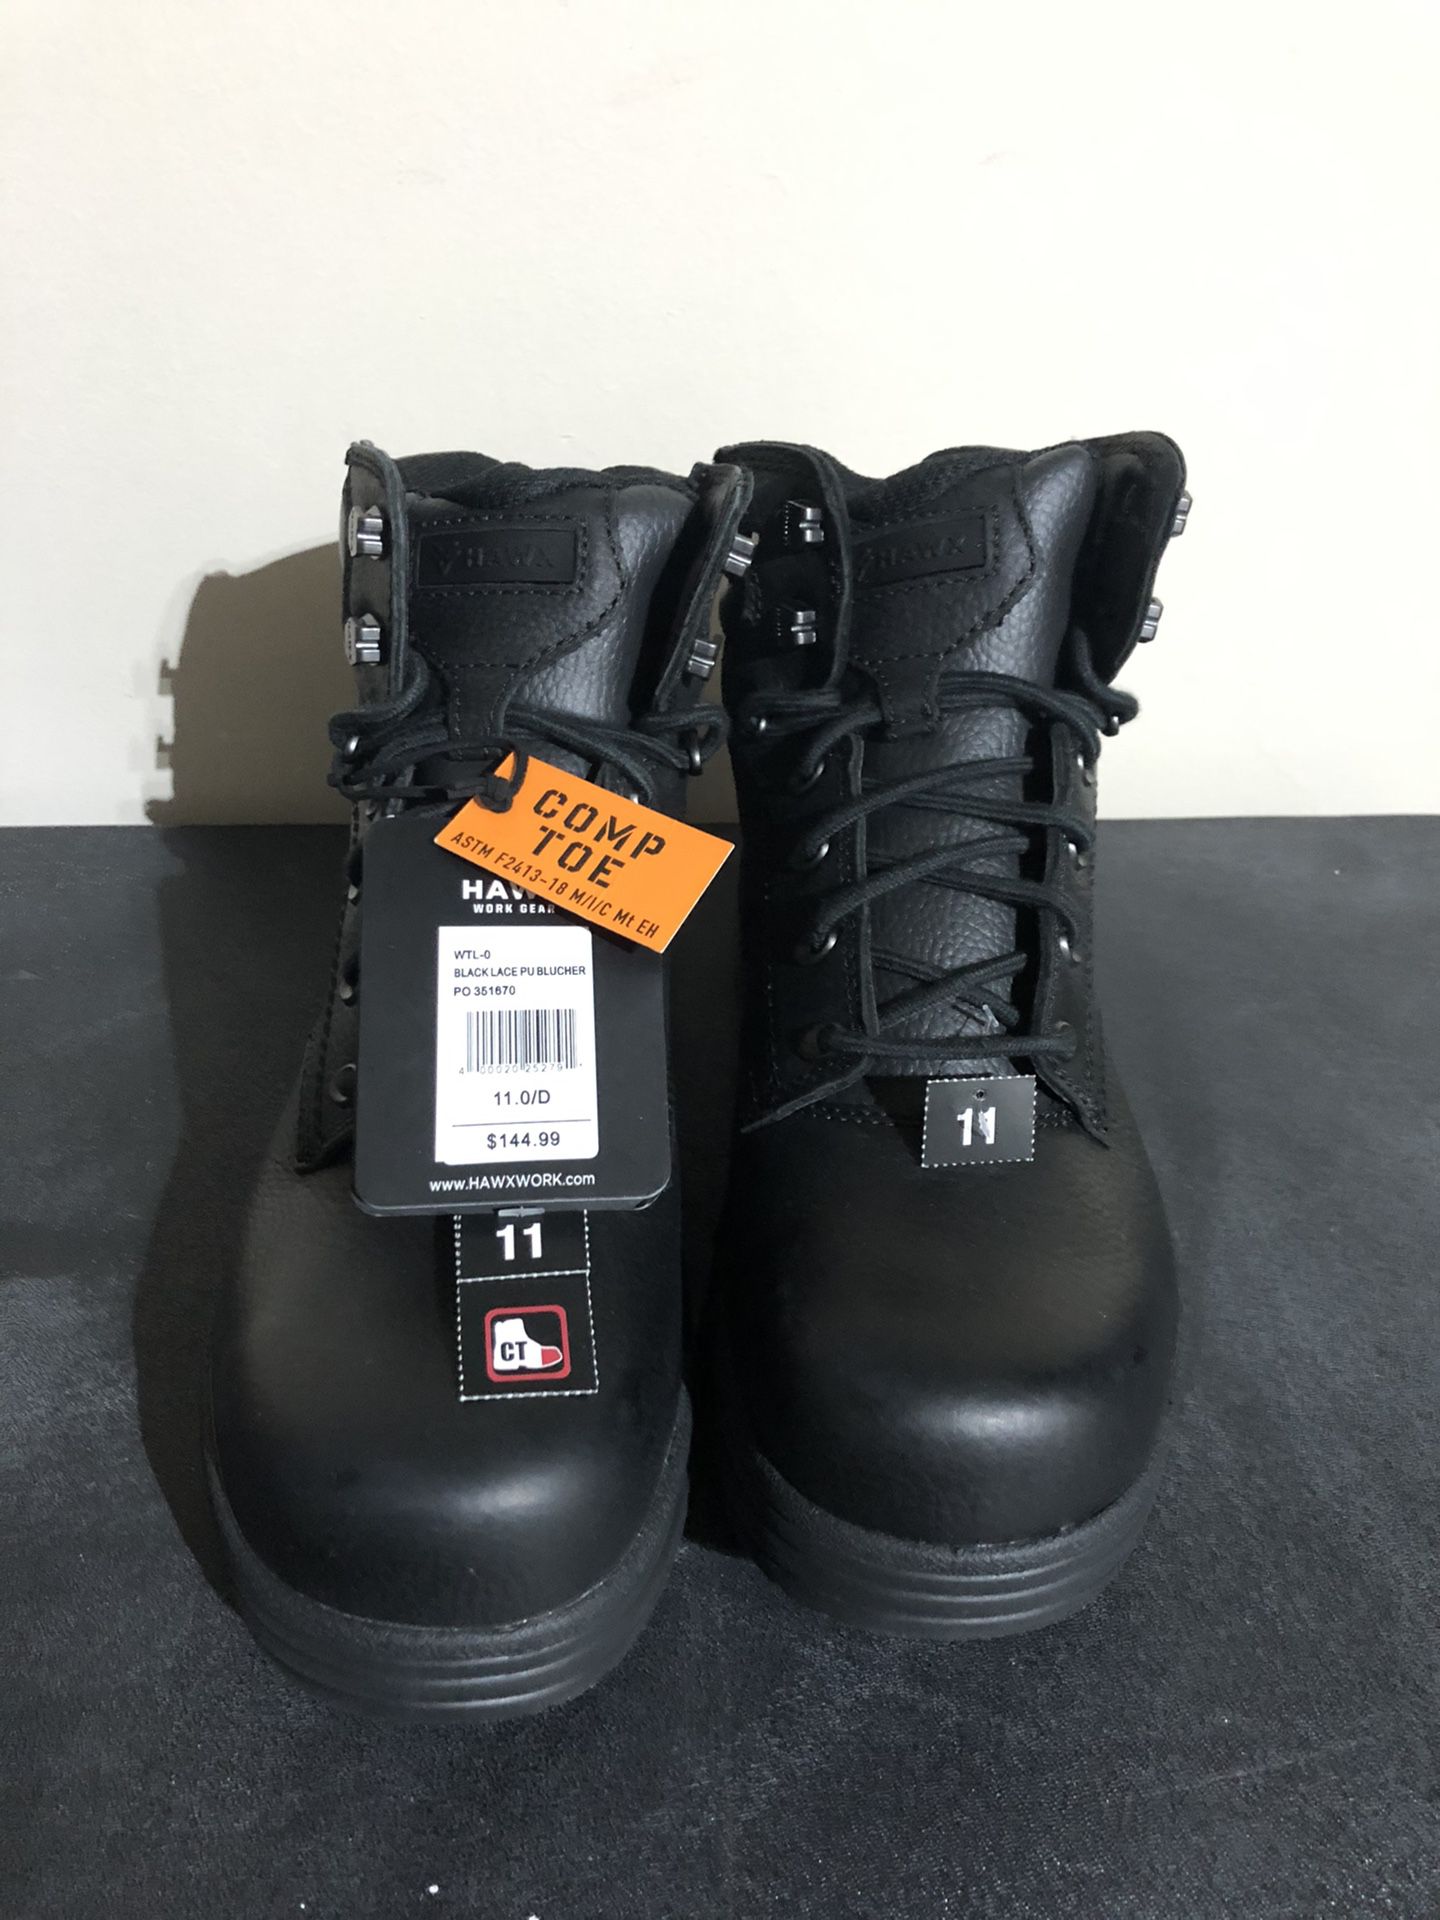 Men’s Work boots New Size 11. $60 OBO